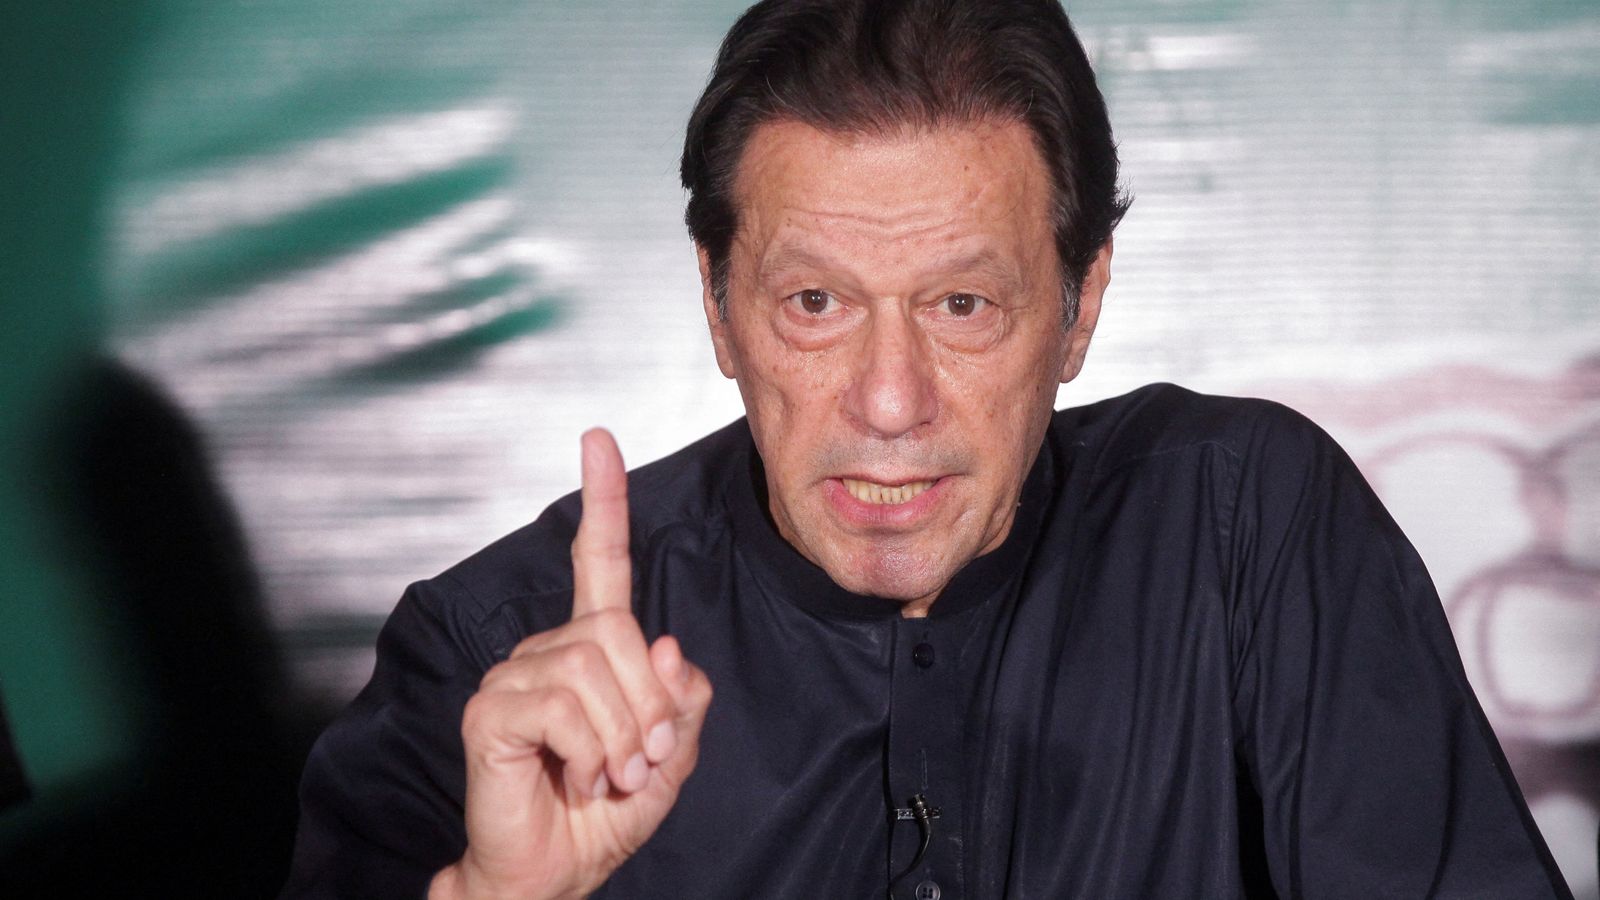 Former Pakistani prime minister Imran Khan sentenced to 10 years in prison for leaking state secrets